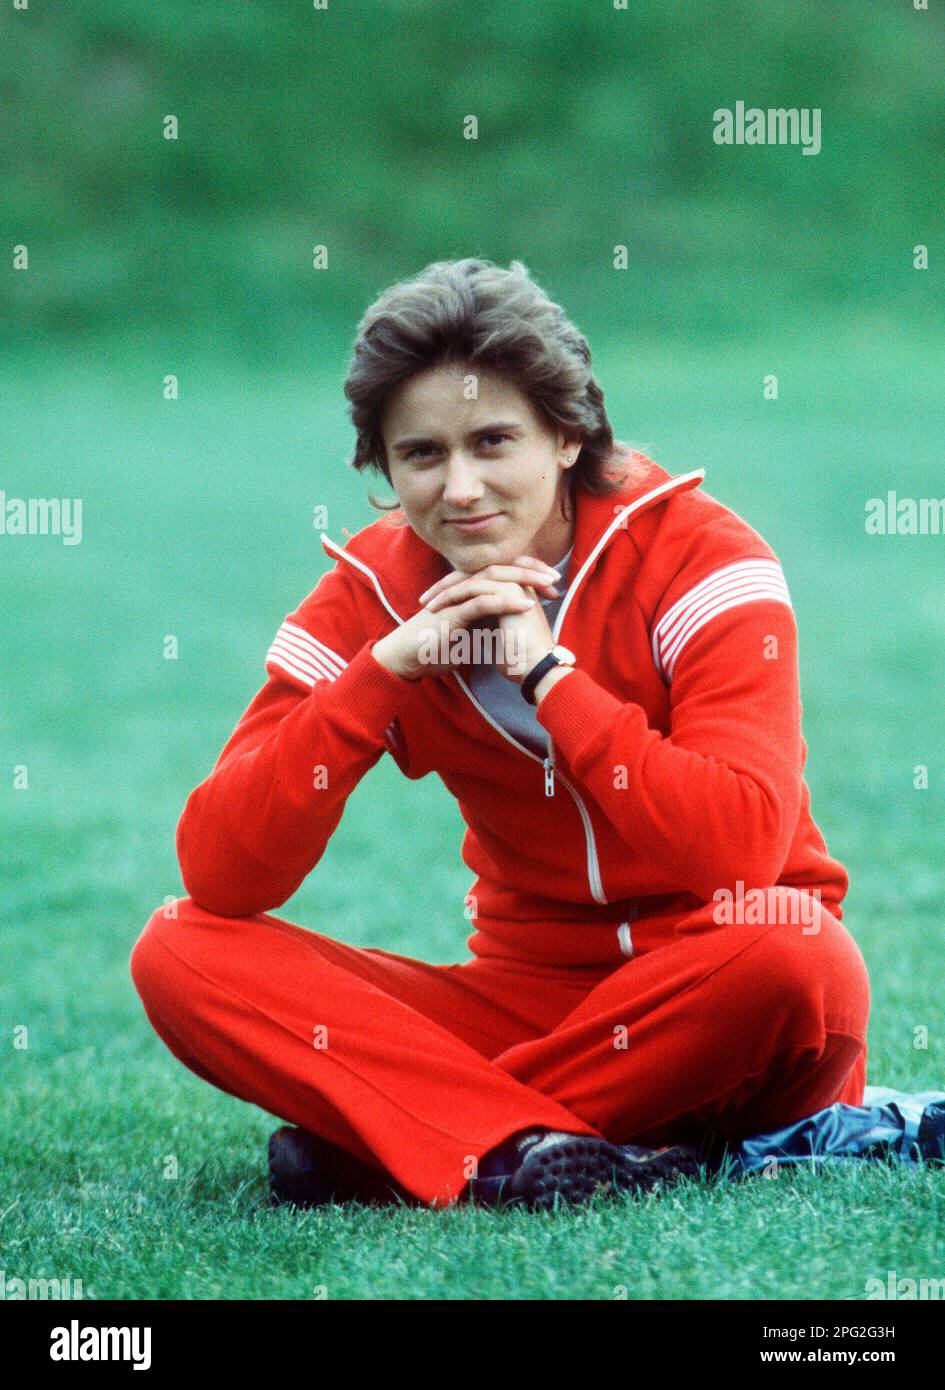 ARCHIVE PHOTO: Marlies GOEHR turns 65 on March 21, 2023, Marlies GOEHR GOHR, OELSNER, GDR, athlete, sits on the pitch in the park, private, at the World Championships in Athletics in Rome from August 29th to September 6th, 1987, ?SVEN SIMON, Princess-Luise-Str.41#45479 Muelheim/Ruhr#tel.0208/9413250#fax 0208/9413260#Kto 1428150 C ommerzbank E ssen BLZ 36040039 #www.SvenSimon.net#e-mail:SvenSimon@t-online .de. Stock Photo